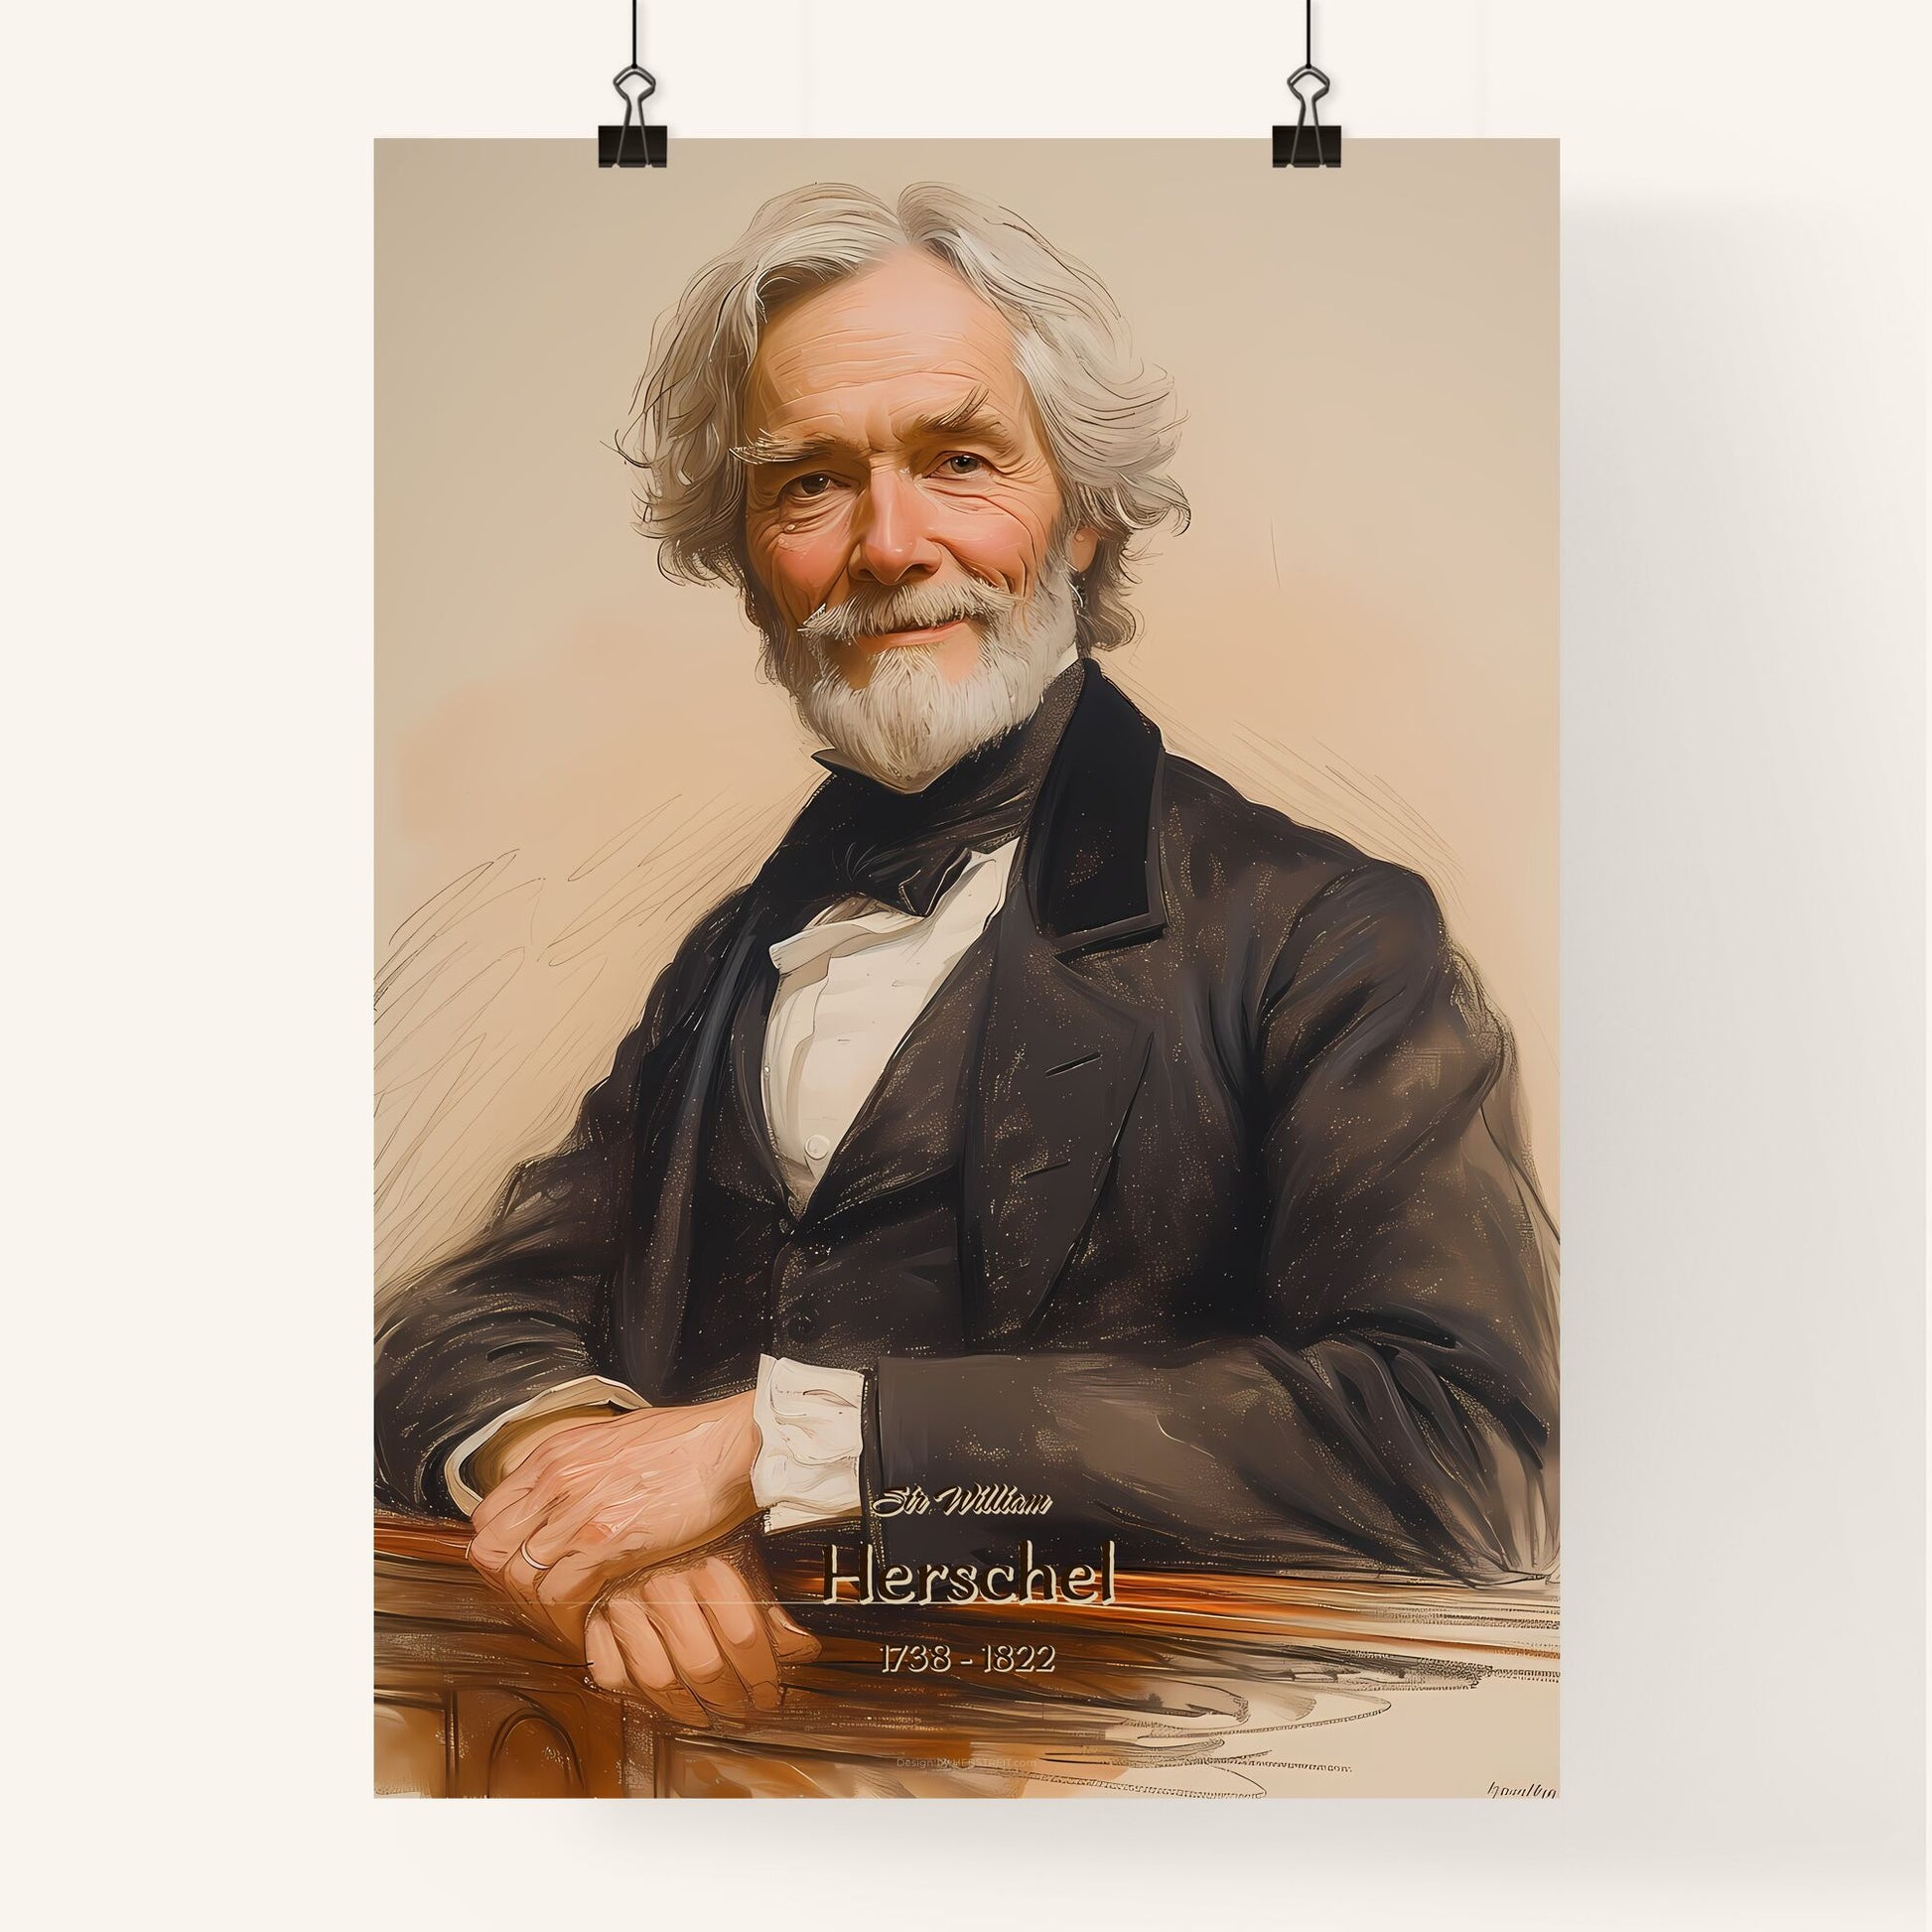 Sir William, Herschel, 1738 - 1822, A Poster of a man with white hair and beard wearing a suit Default Title